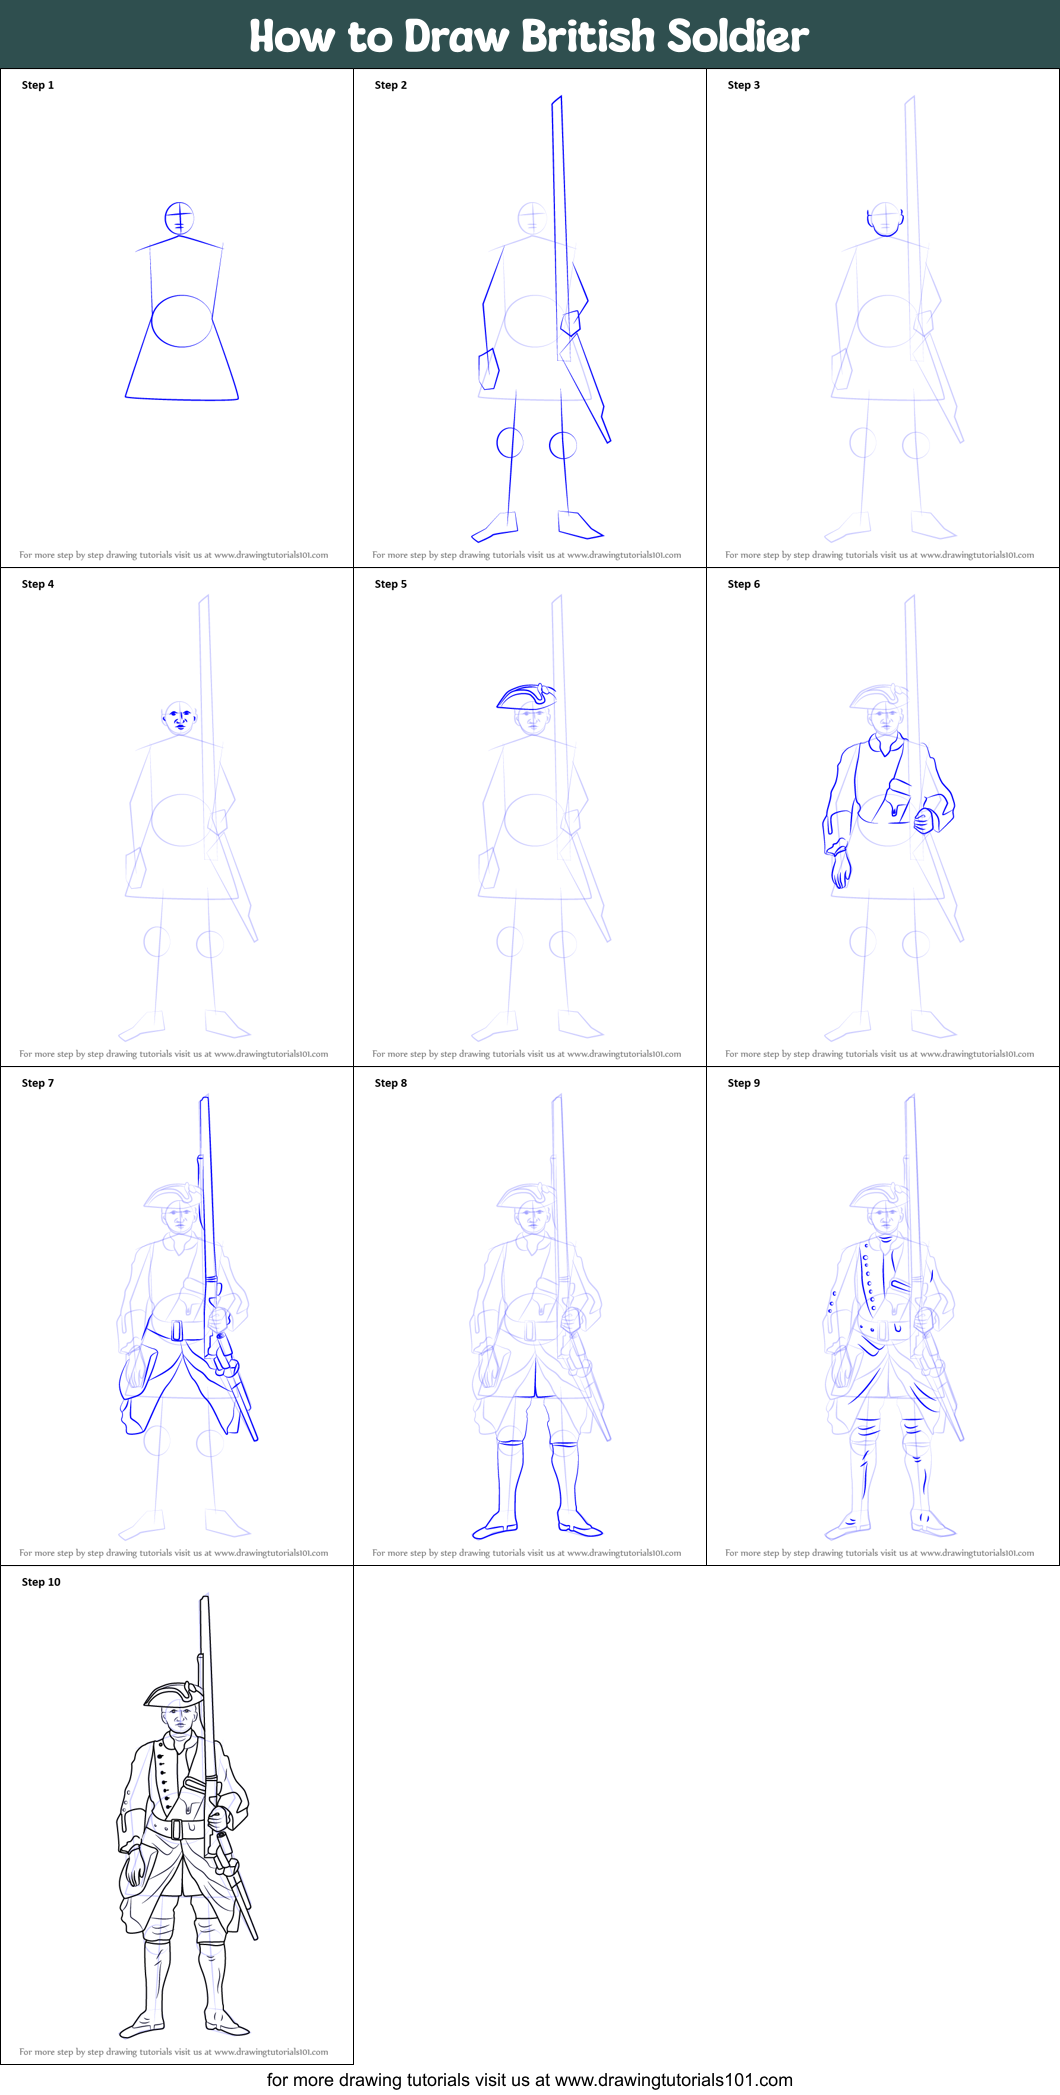 How to Draw British Soldier printable step by step drawing sheet